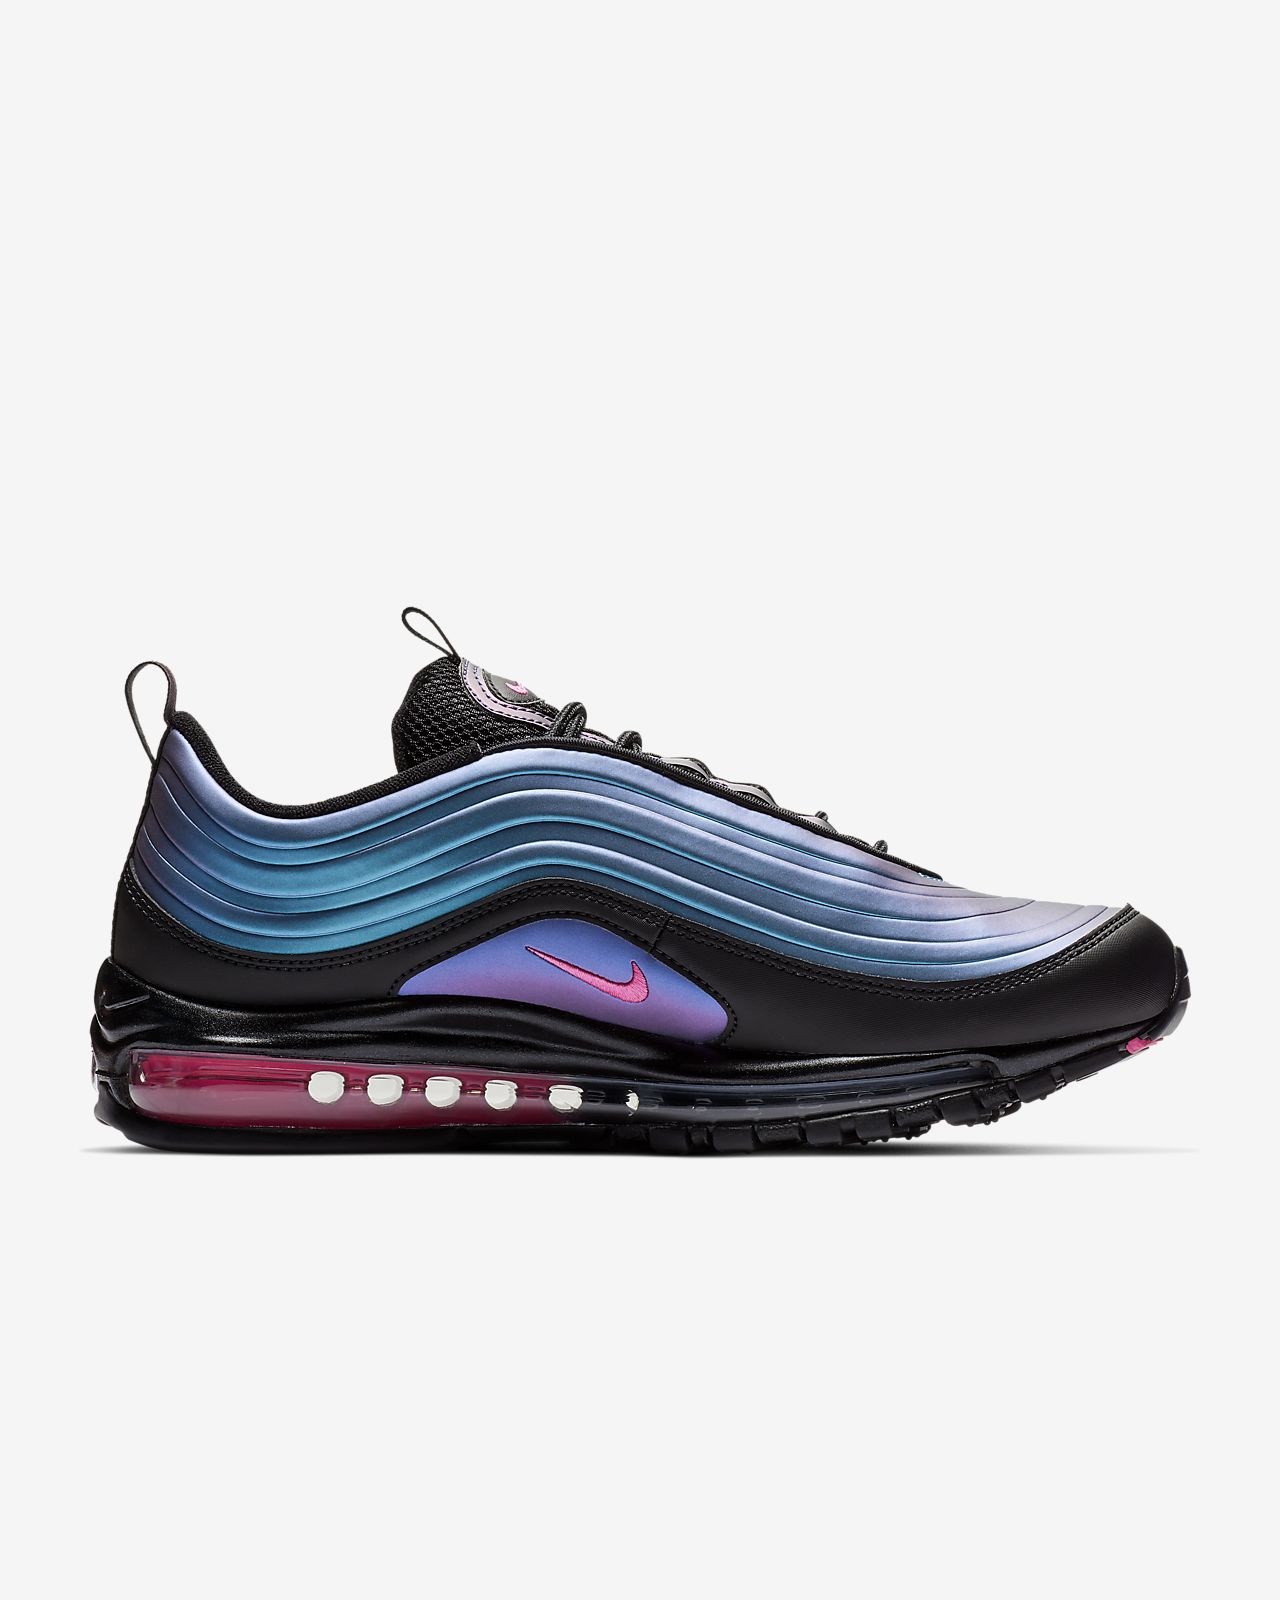 blue and pink 97s